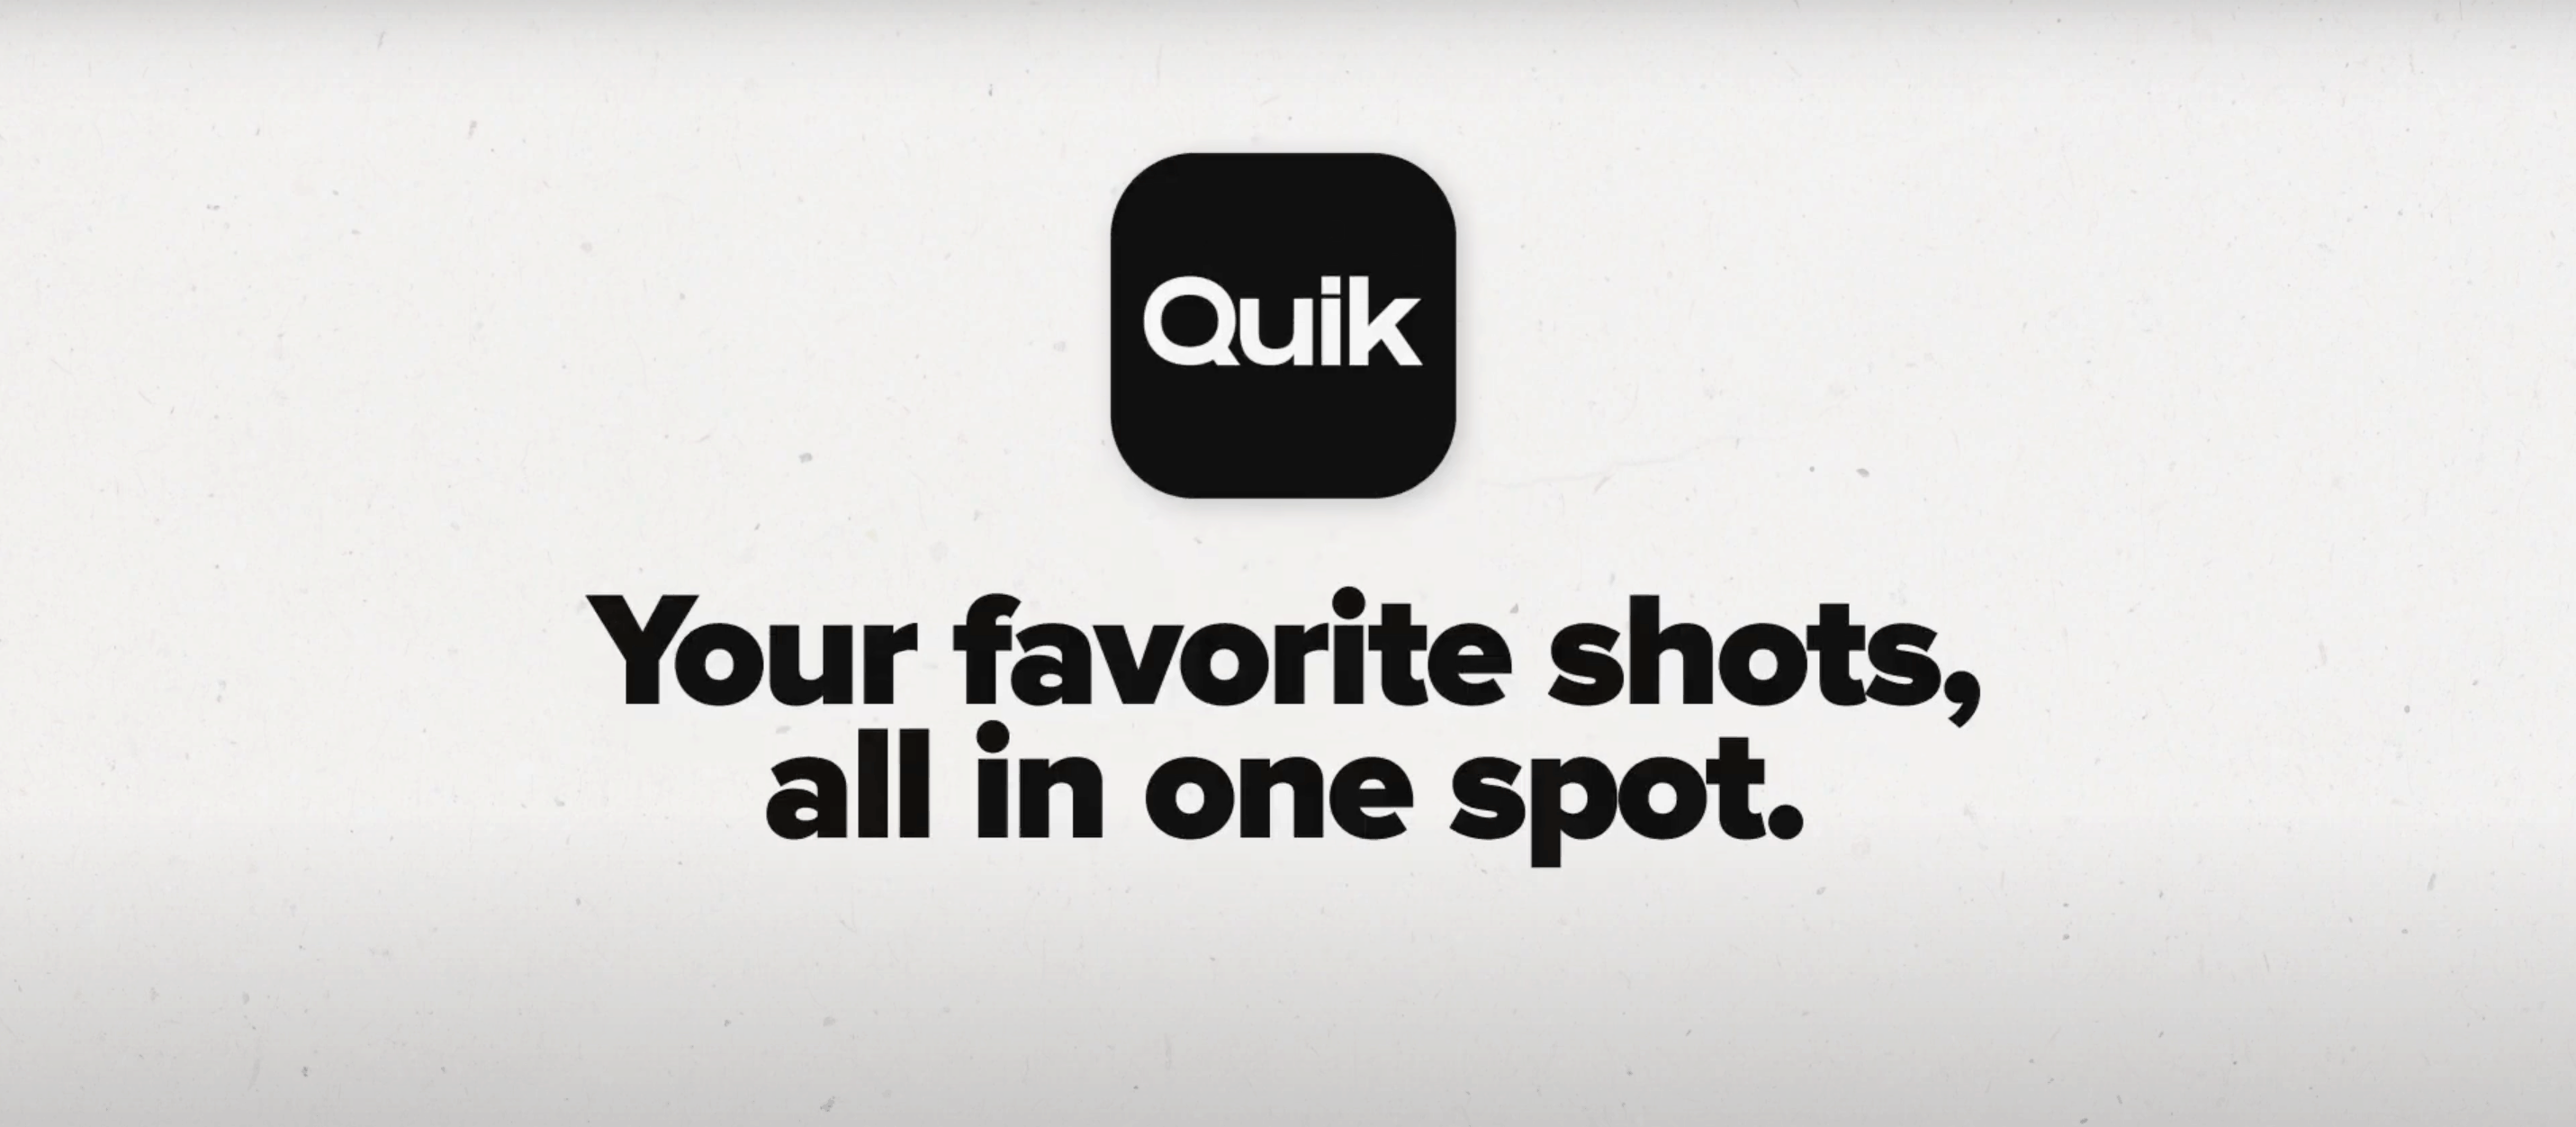 You are currently viewing GoPro’s New App ‘Quik’ Helps You Get the Most Out of Your Photos and Videos, No Matter What Phone or Camera You’re Using